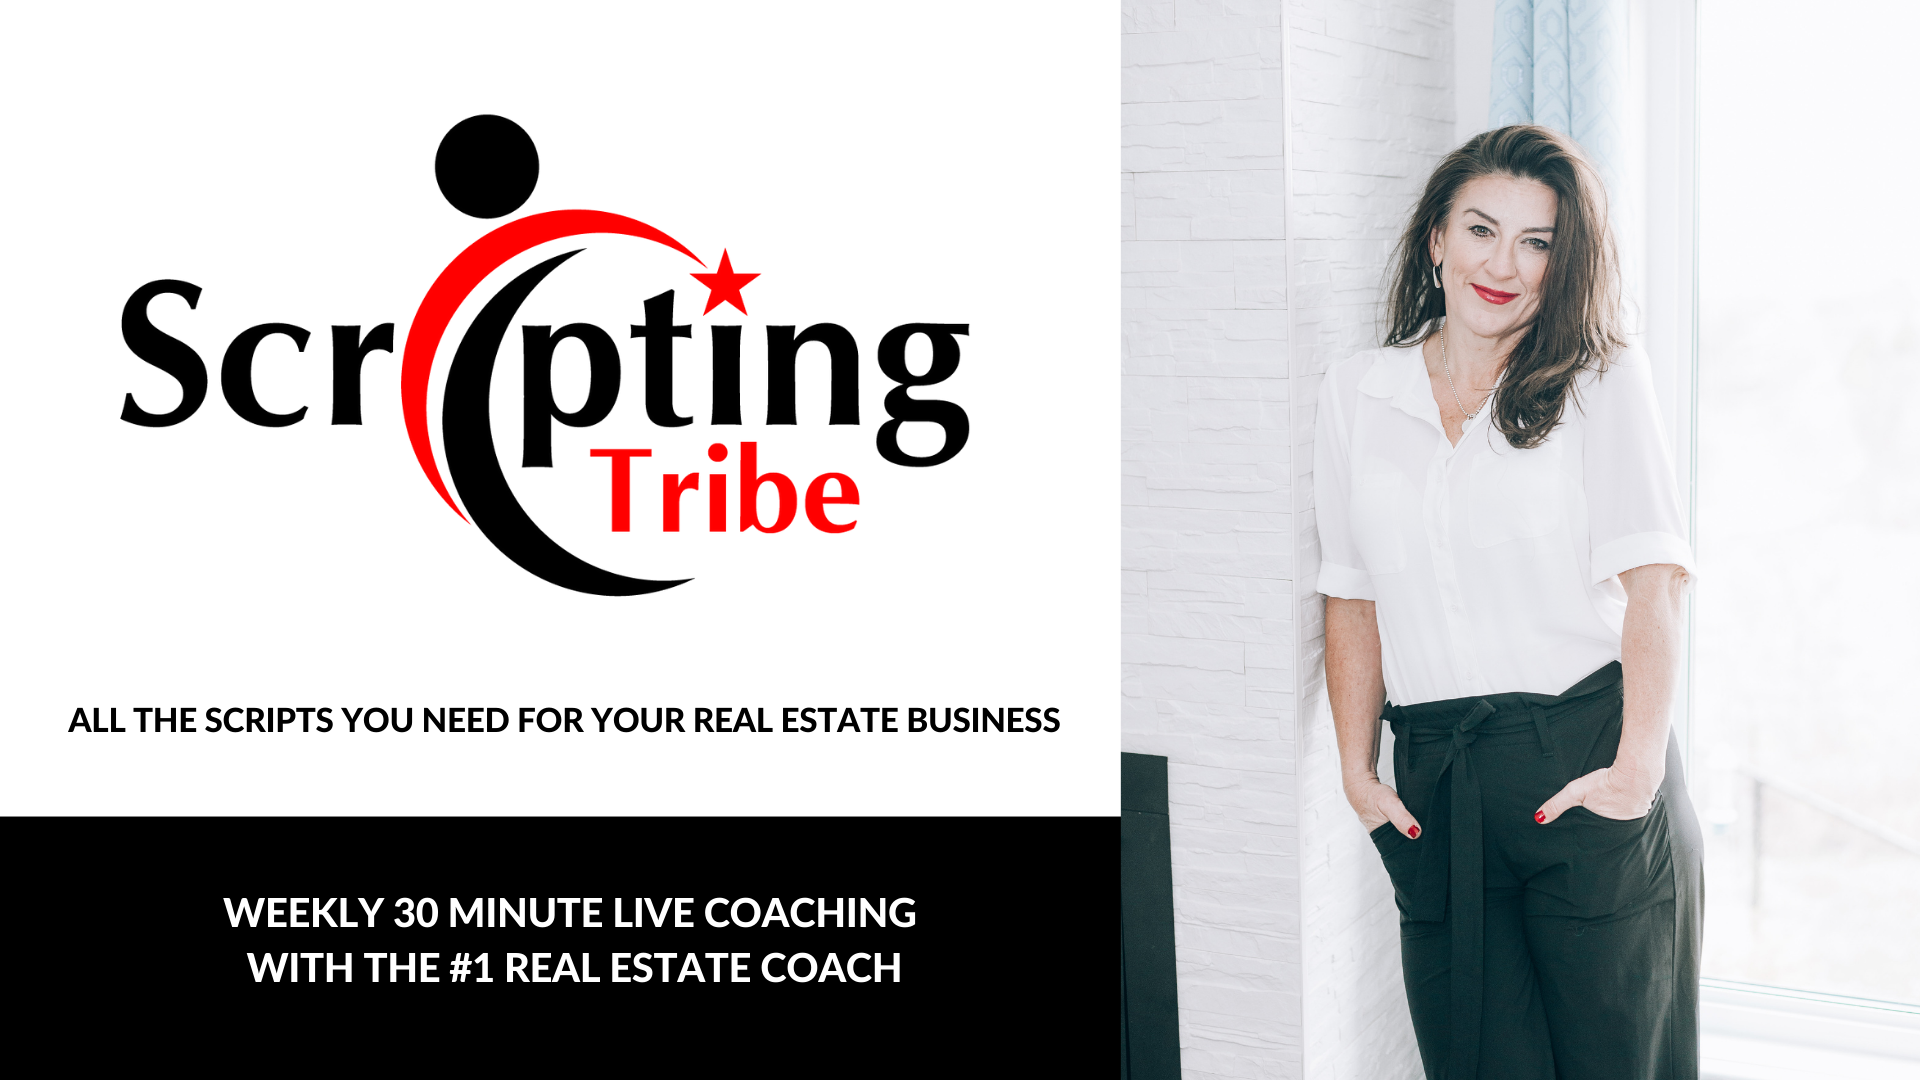 Top Real Real Estate Coaching Services Reviews